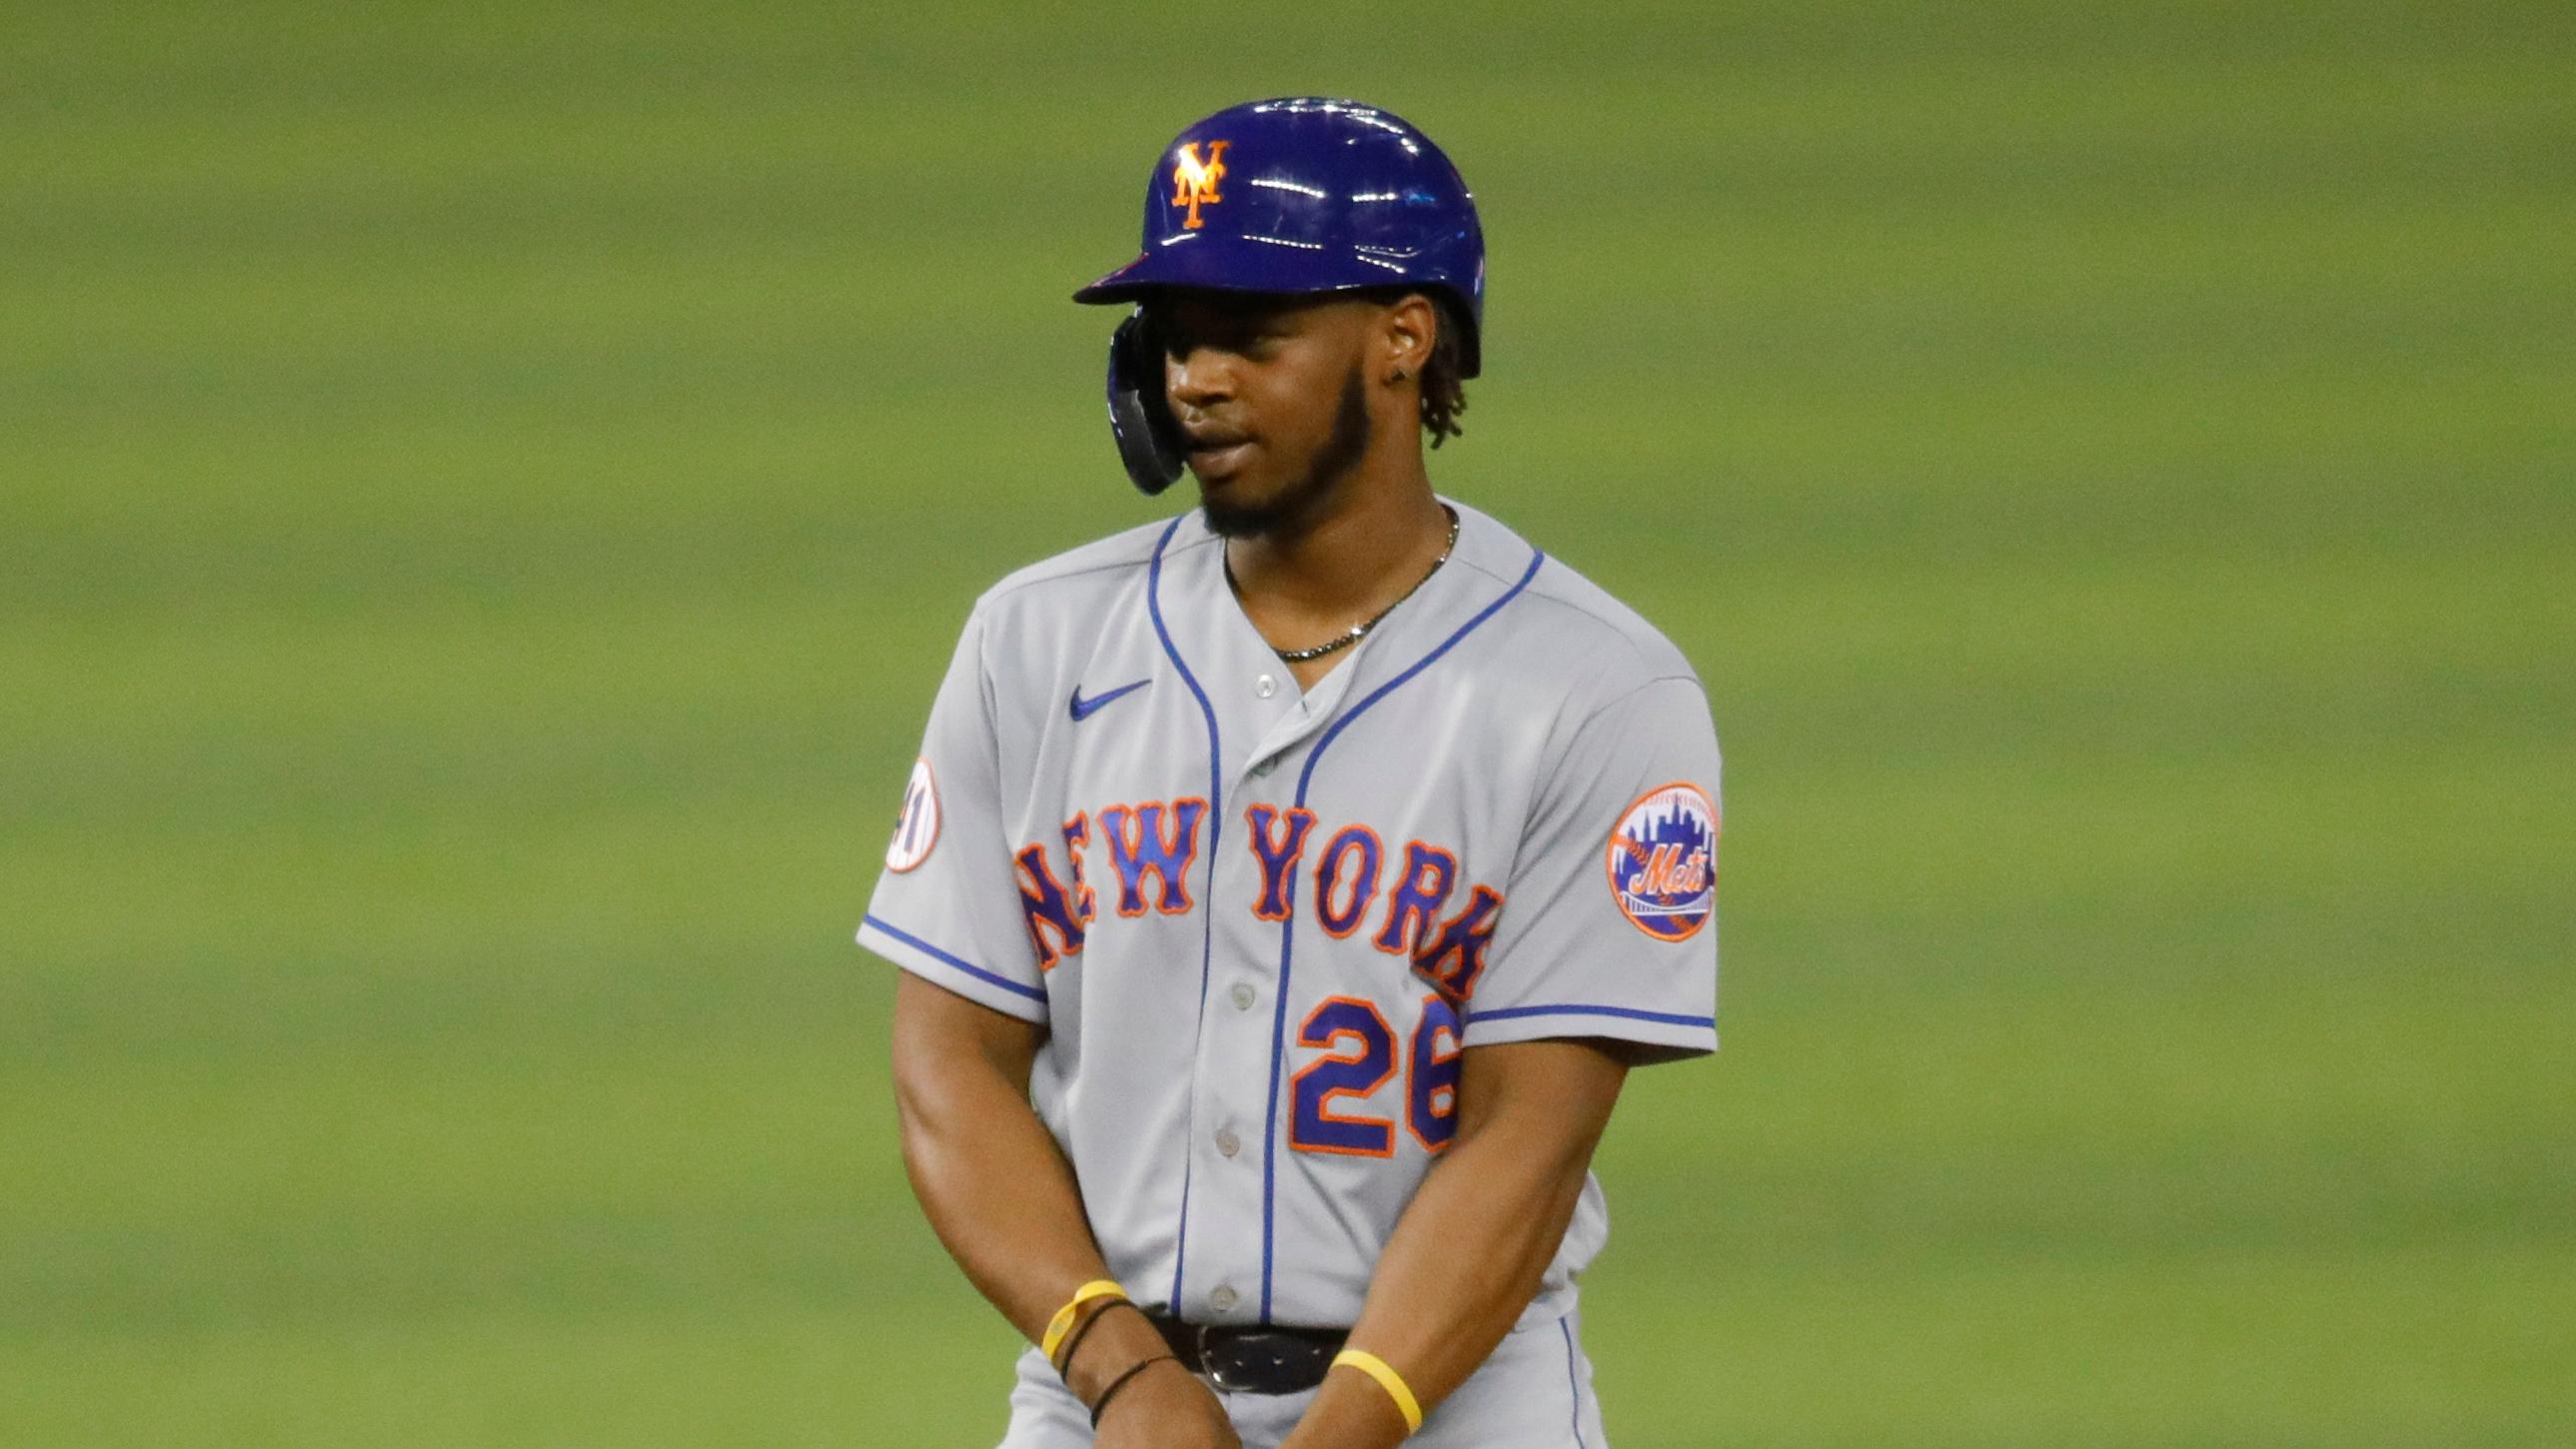 May 21, 2021; Miami, Florida, USA; New York Mets center fielder Khalil Lee (26) reacts after connecting for a base hit against the Miami Marlins during the twelfth inning at loanDepot Park. / Sam Navarro-USA TODAY Sports